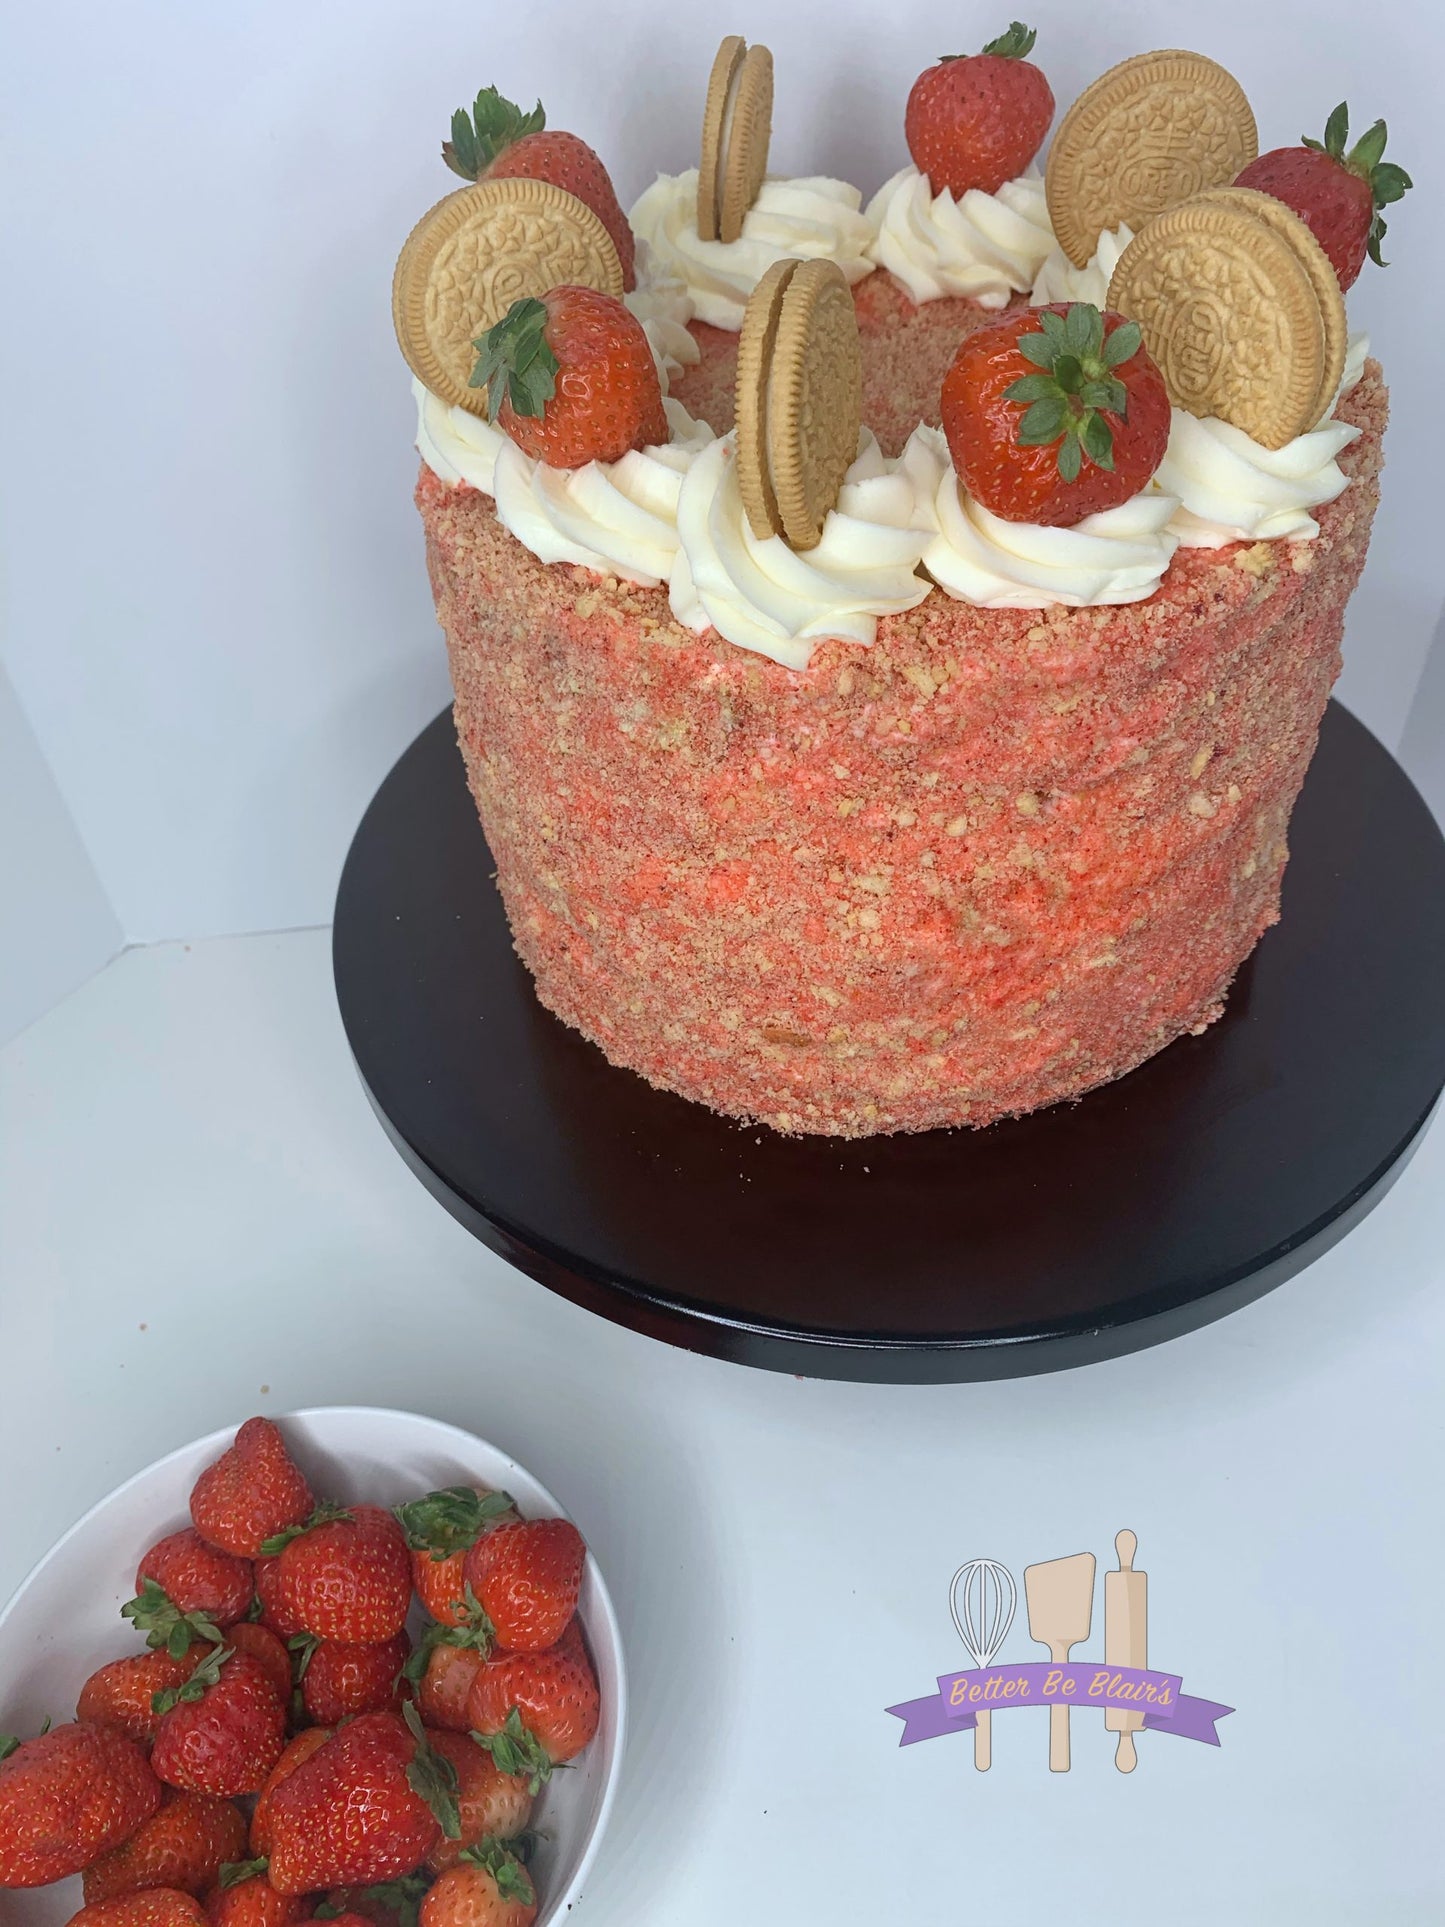 Strawberry Crunch Cake with cheesecake center